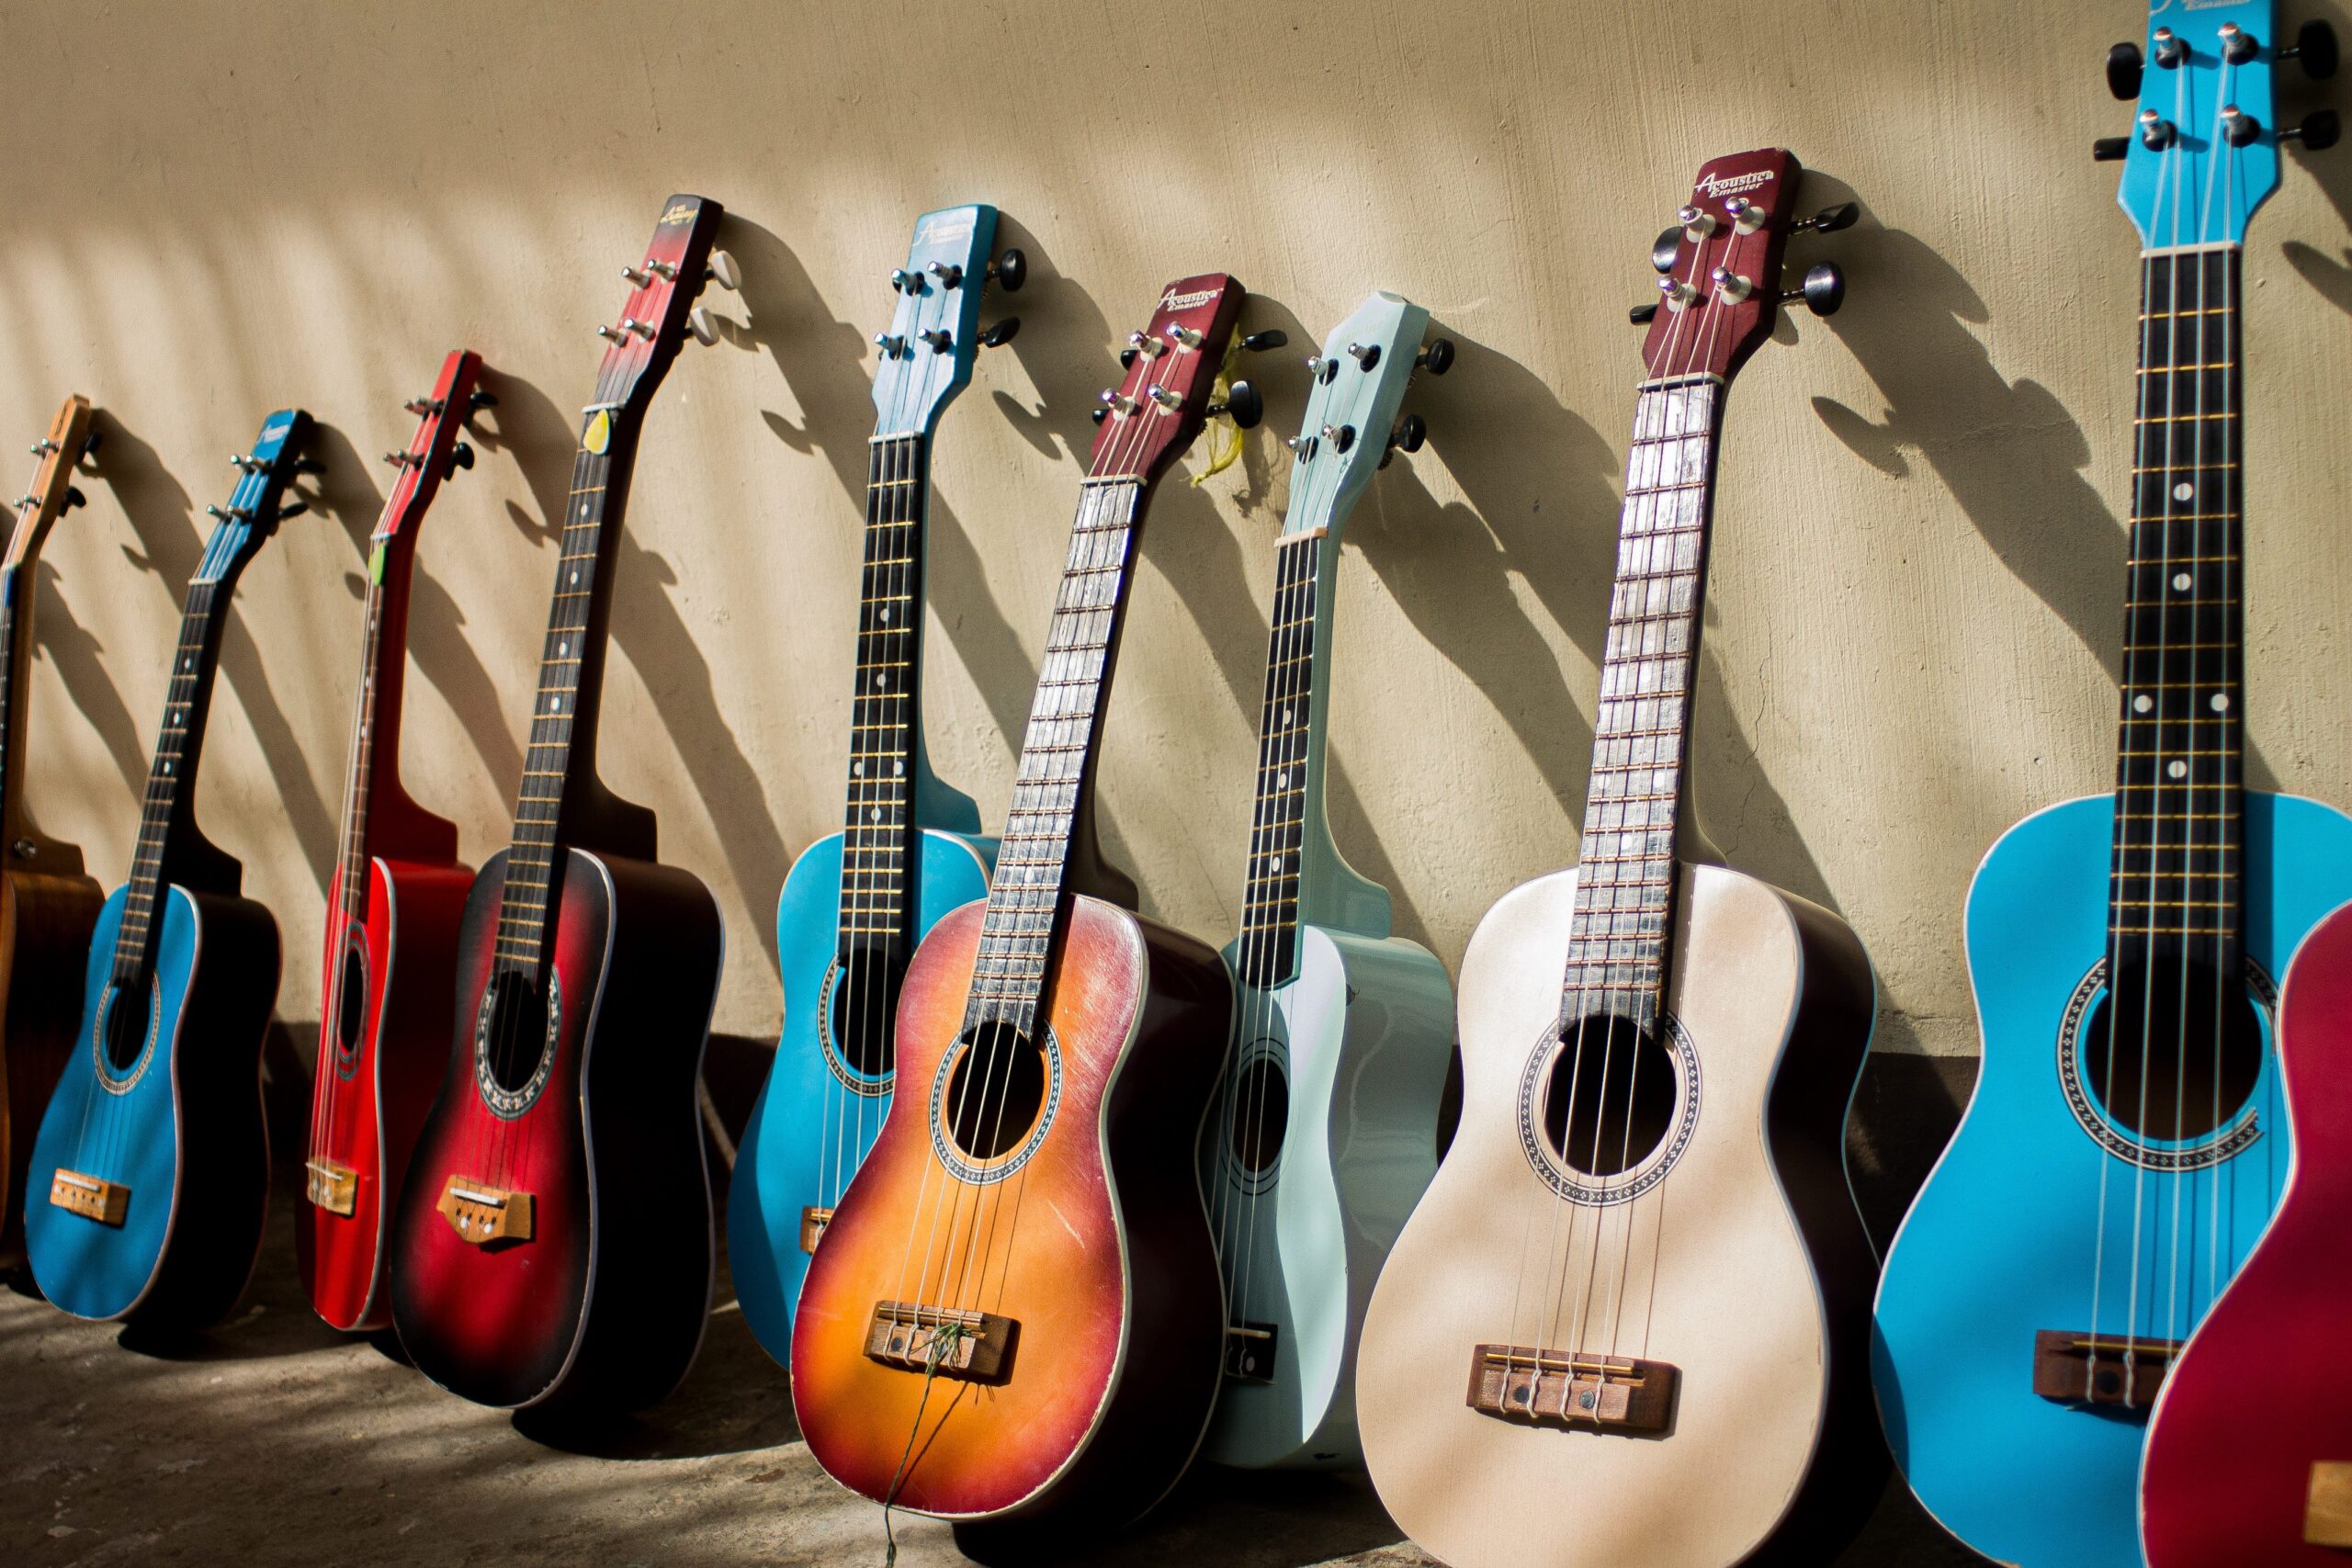 Ukulele review and buying guide
